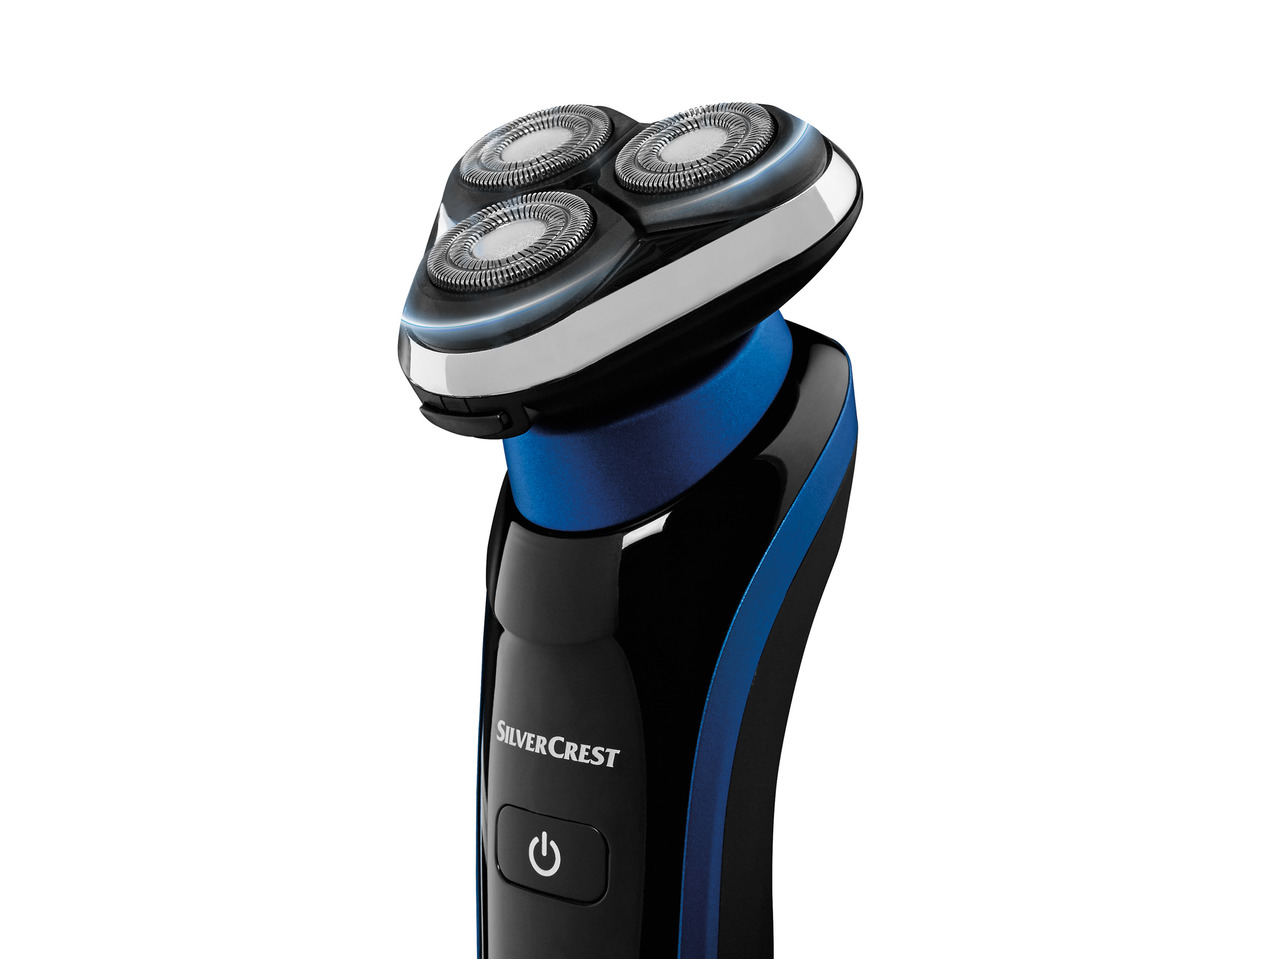 Silvercrest Personal Care Rotary Shaver1